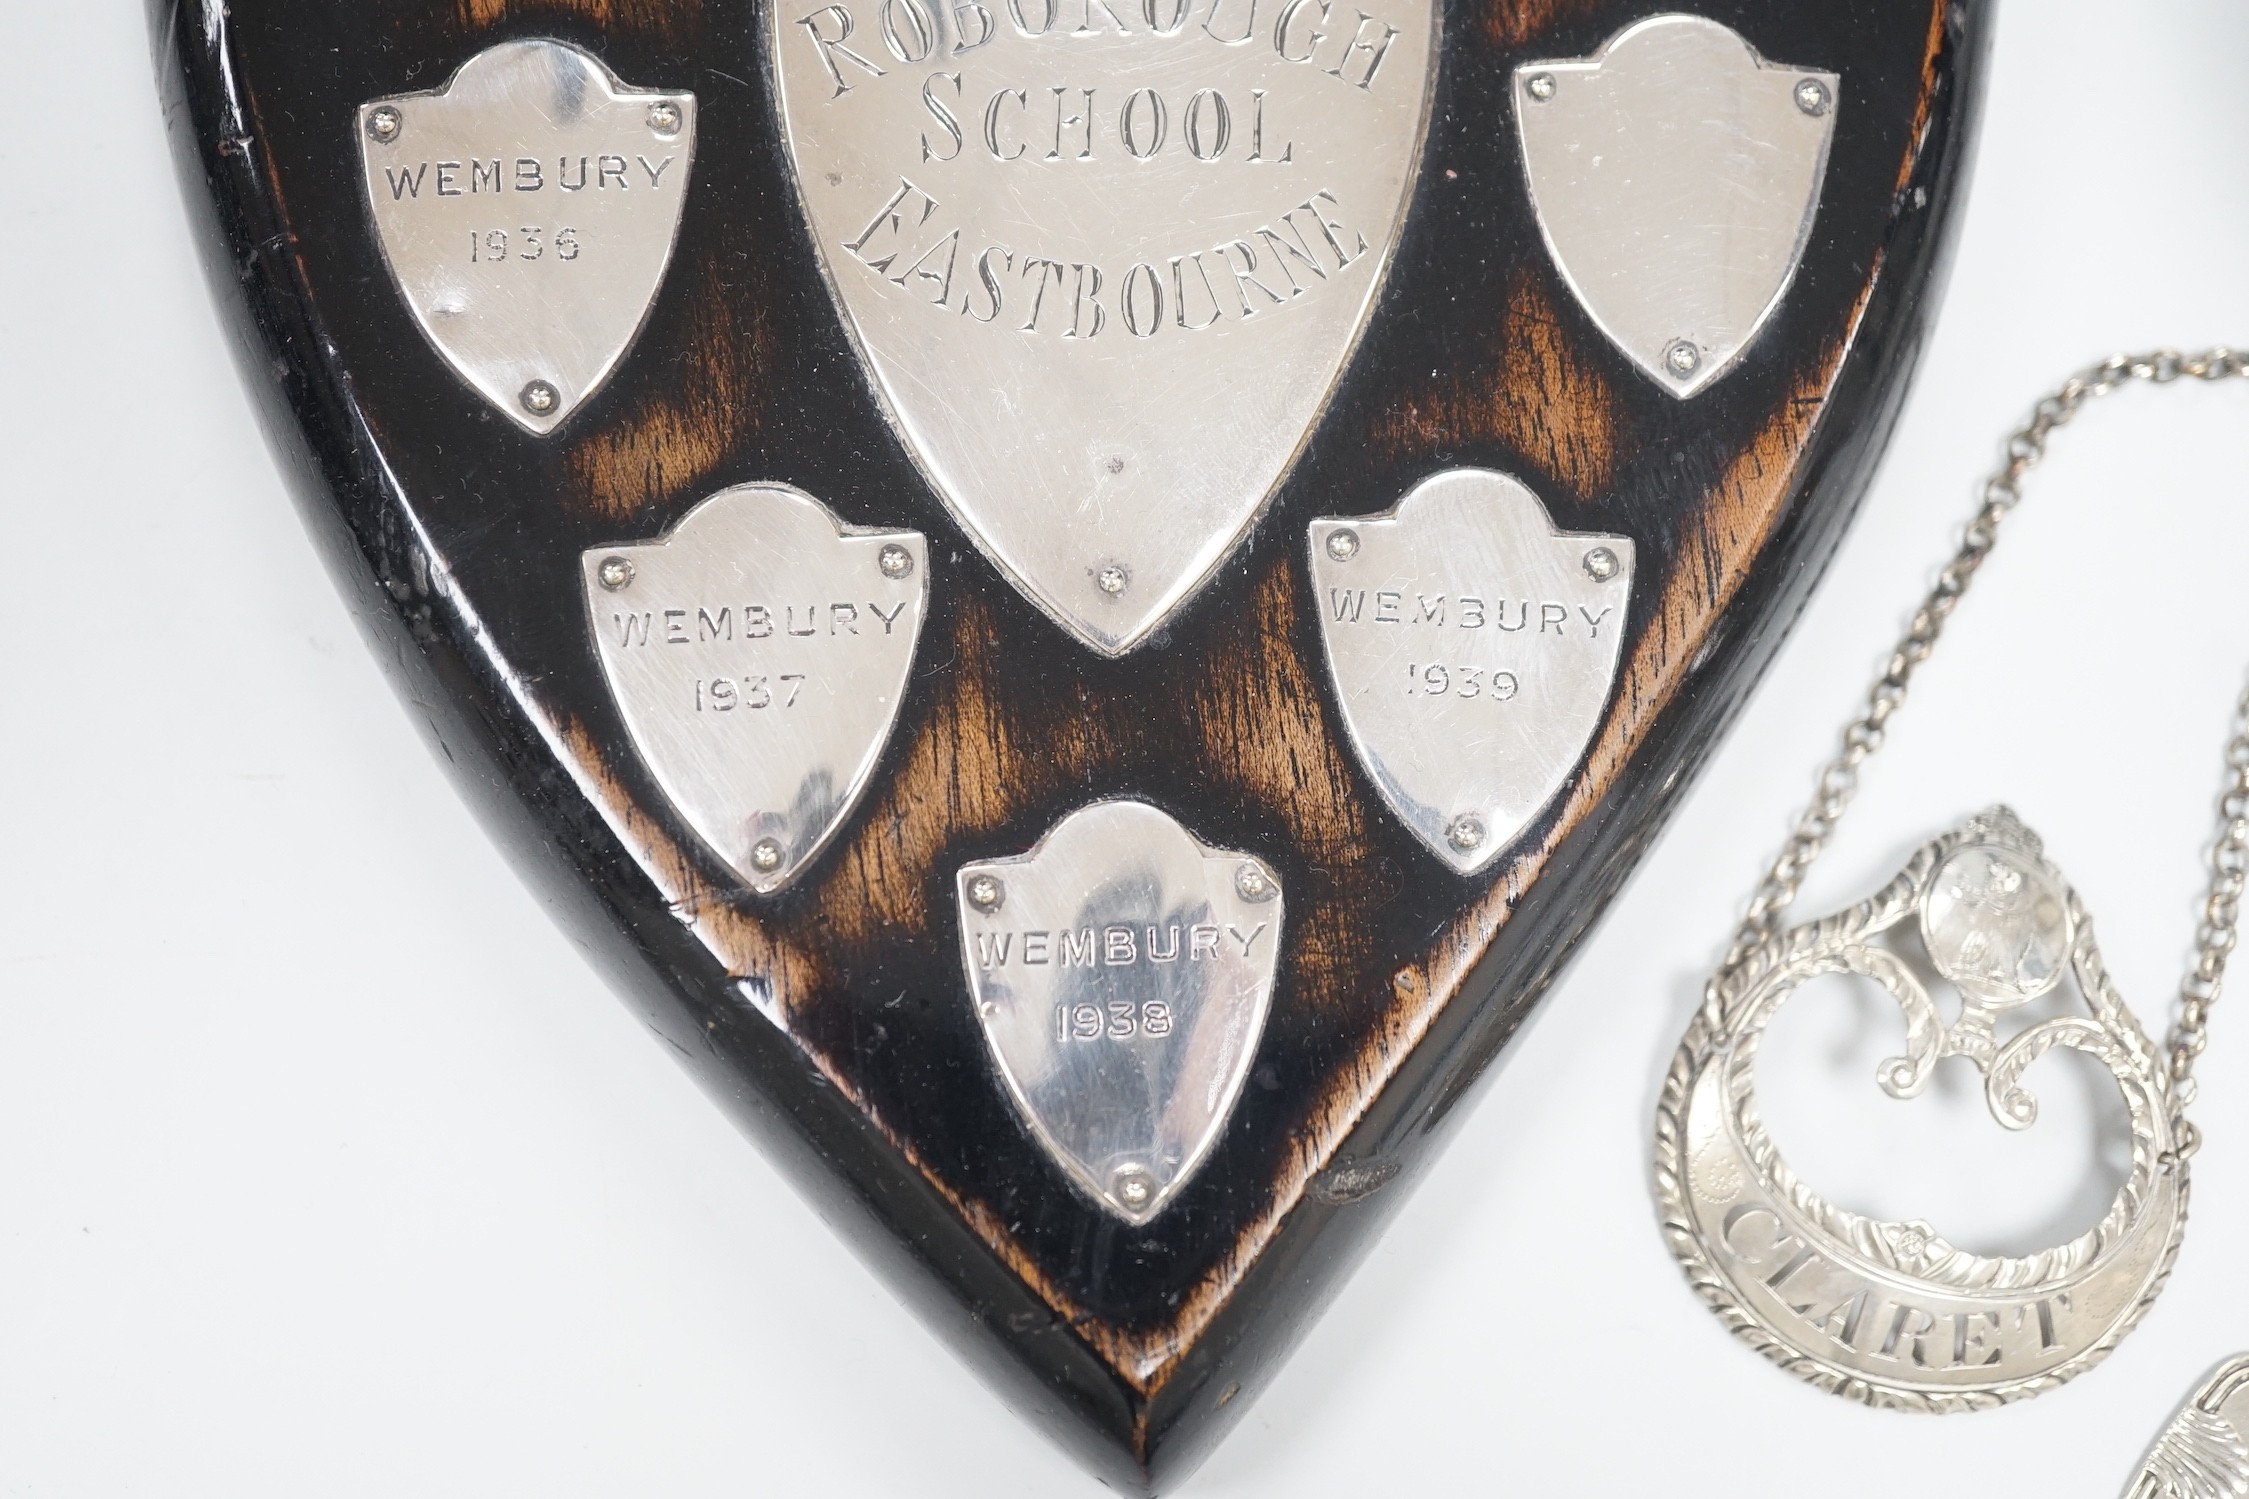 A small 1930's silver christening mug, two 19th century silver decanters labels 'Claret' and 'Marsala' and a white metal mounted polished wood shield 'Roborough School, Eastbourne Chess' and a Victorian silver oval musta